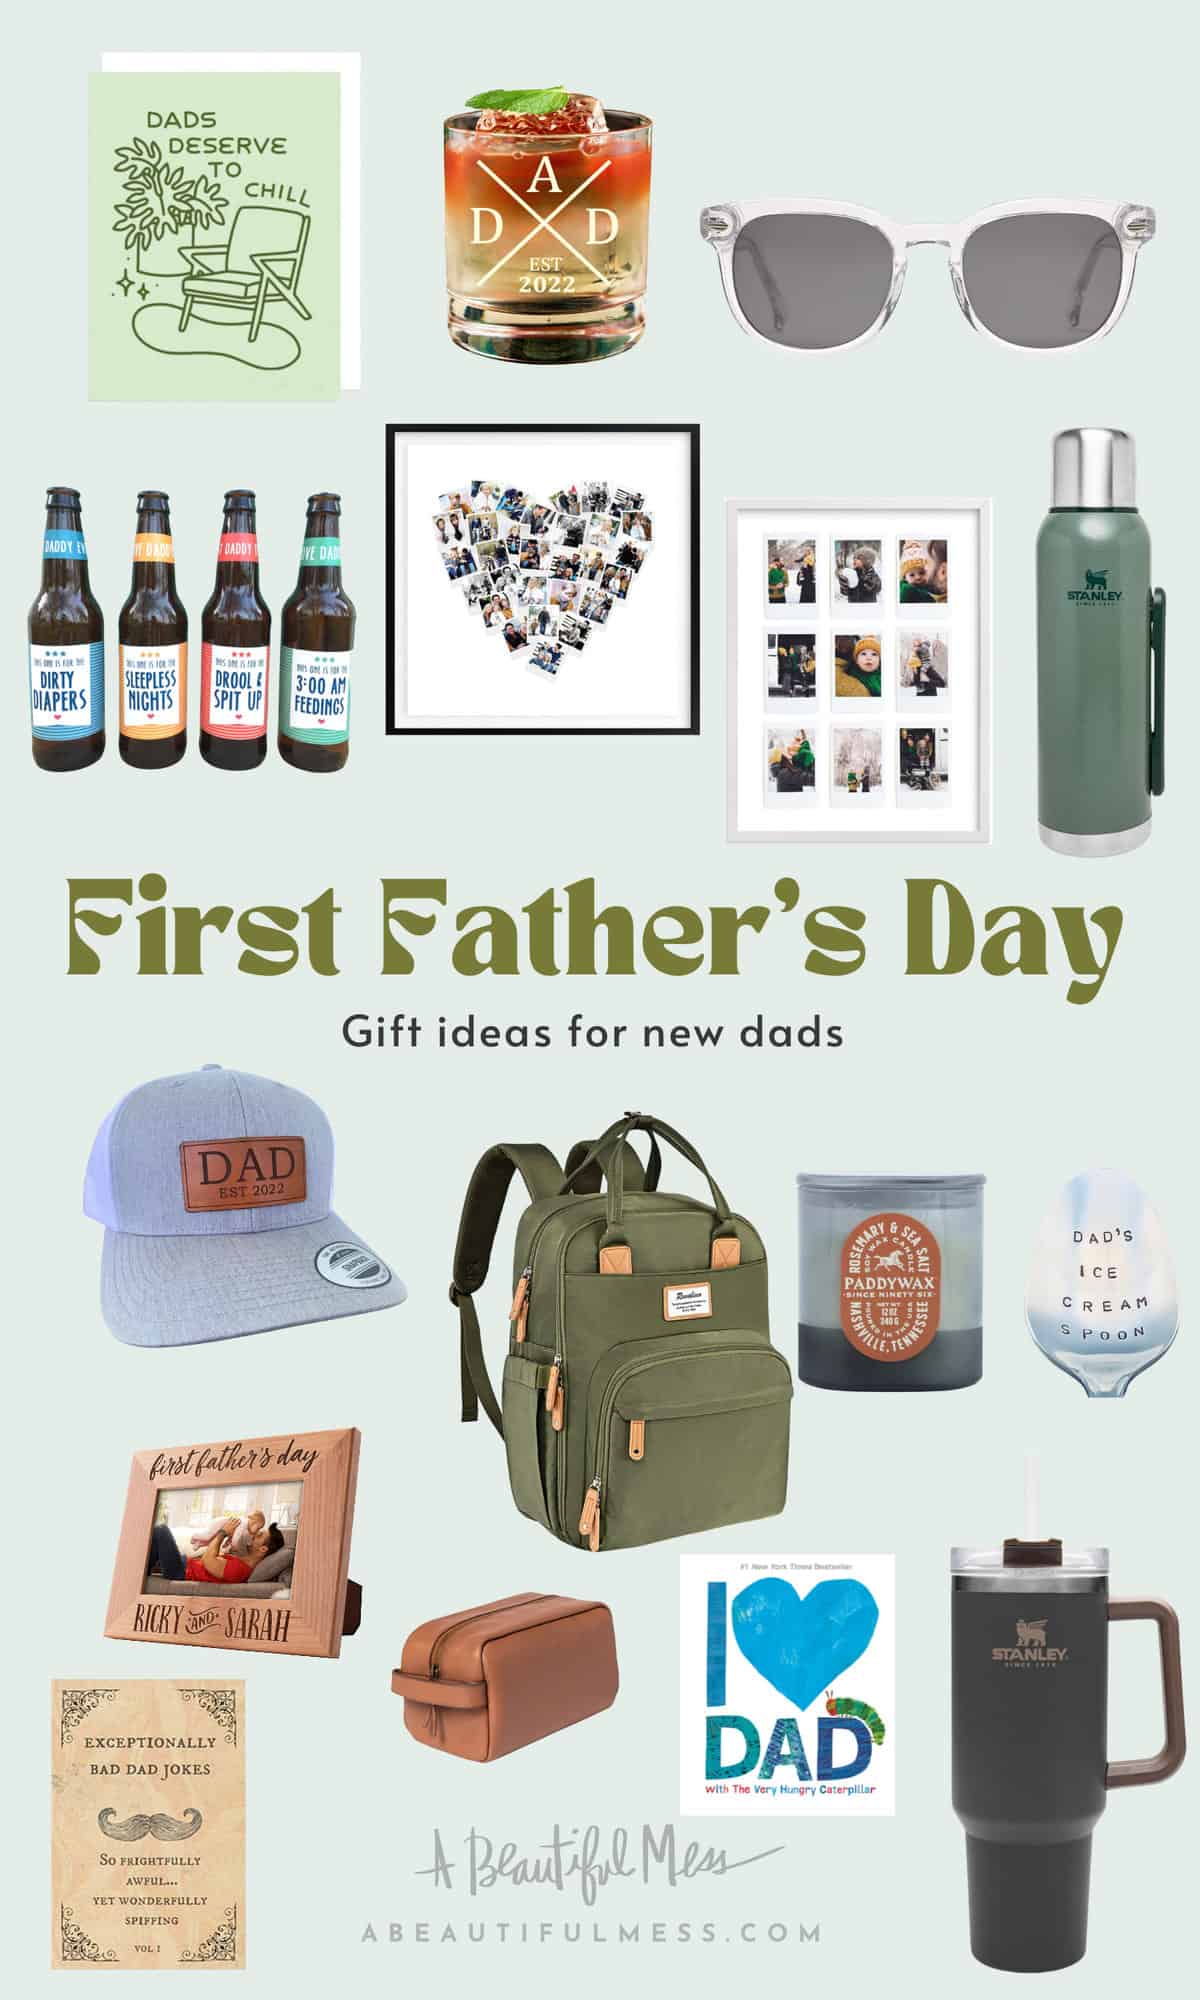 Father's Day Garage Gift Guide - The Best Gifts for Dad